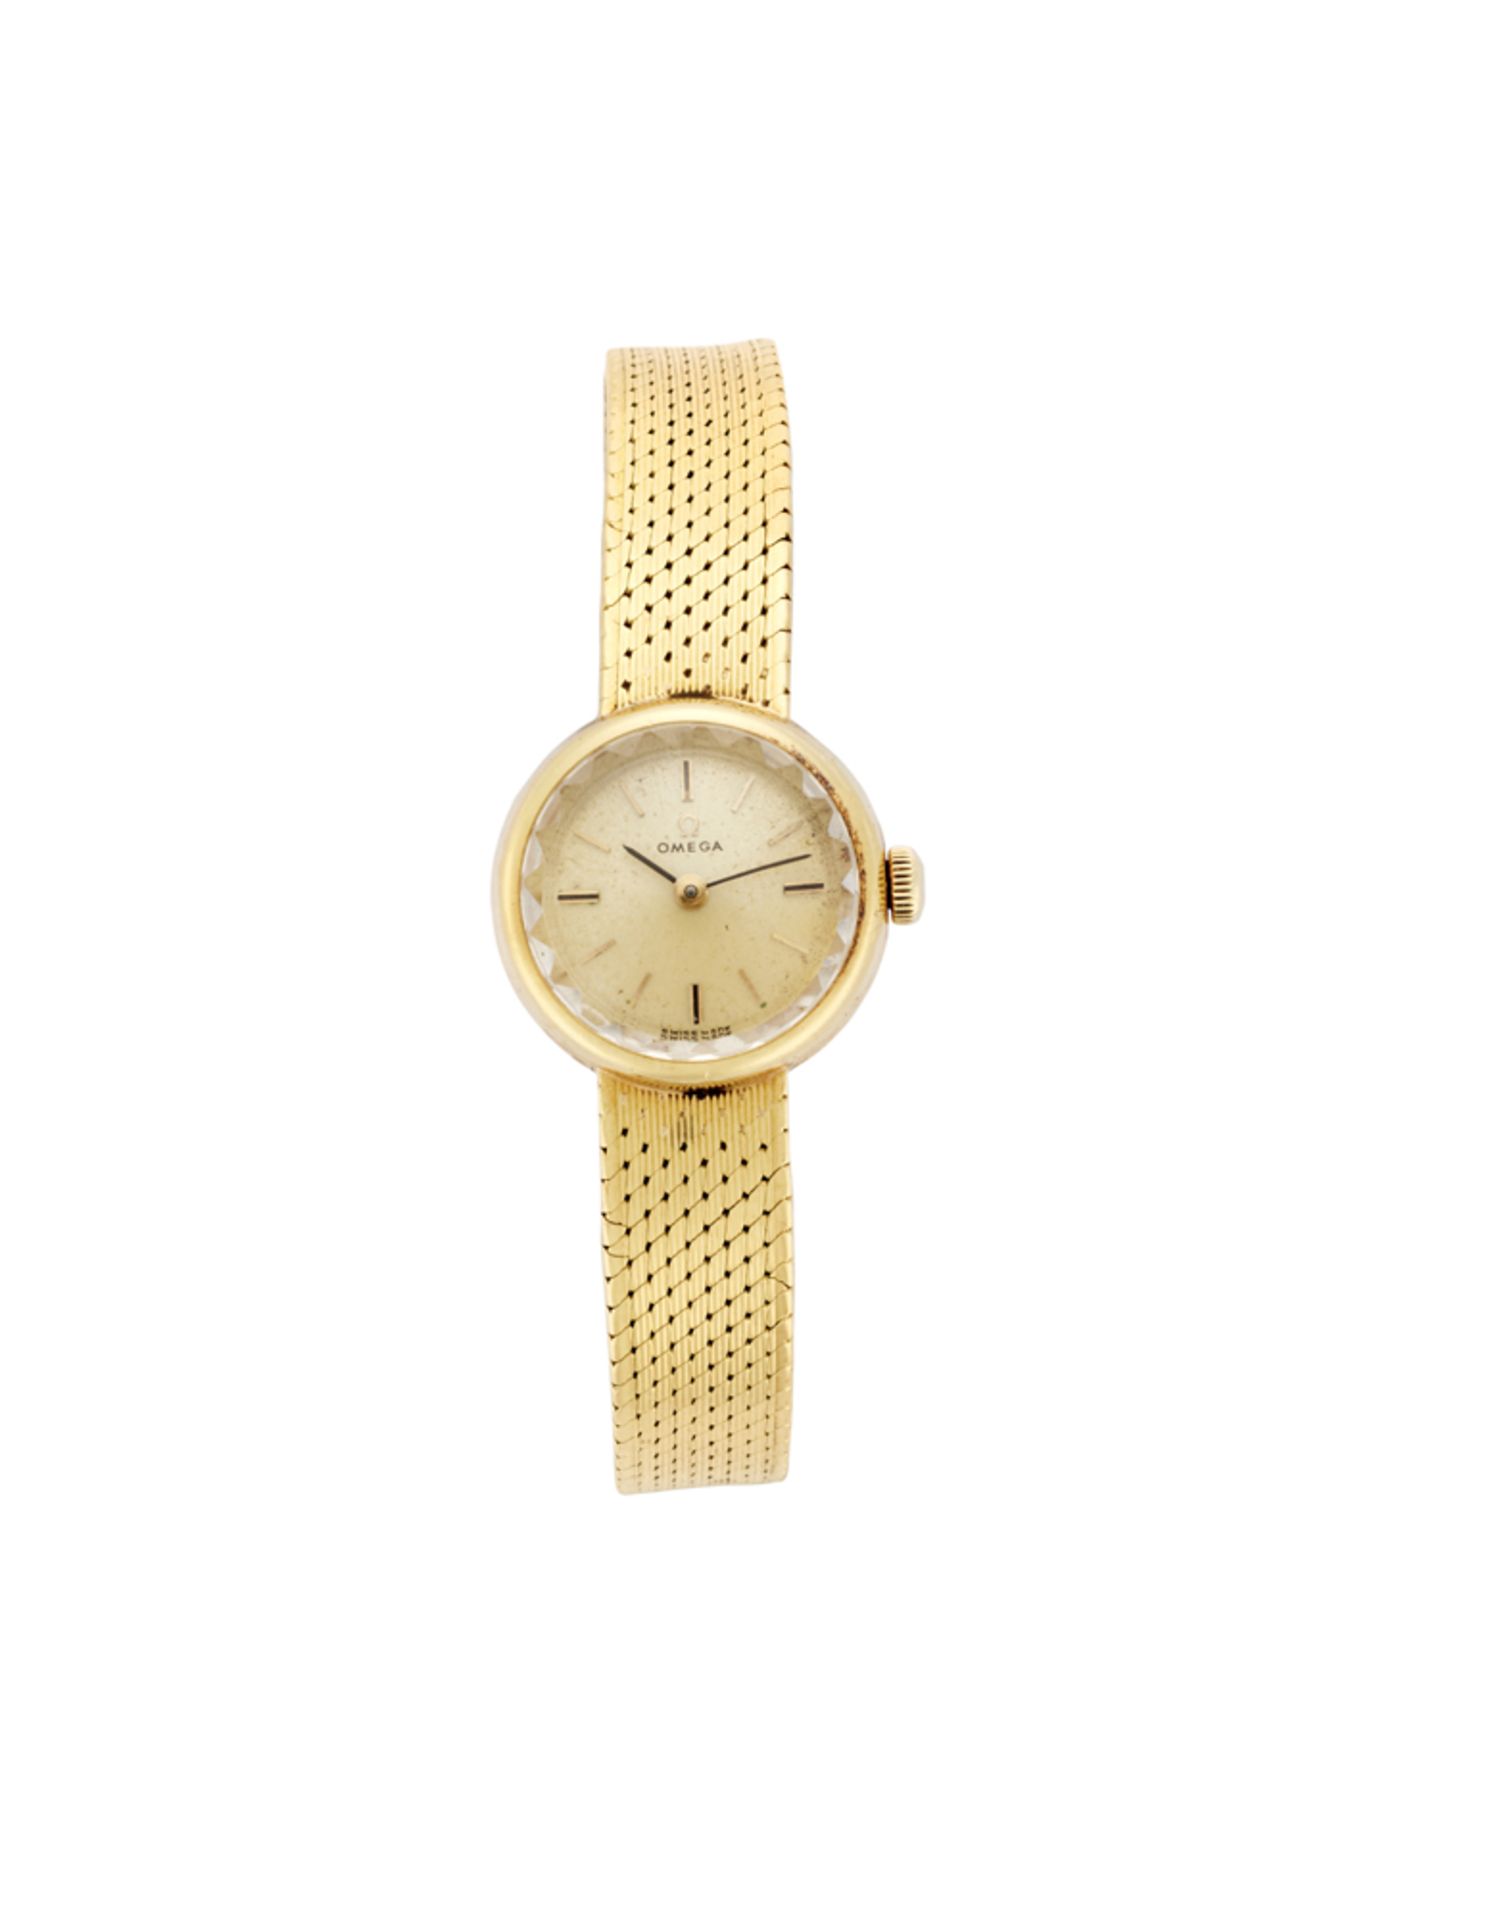 OMEGA<br>Lady's 18K gold wristwatch with bracelet<br>1960s<br>Dial, movement and case signed<br>Manu